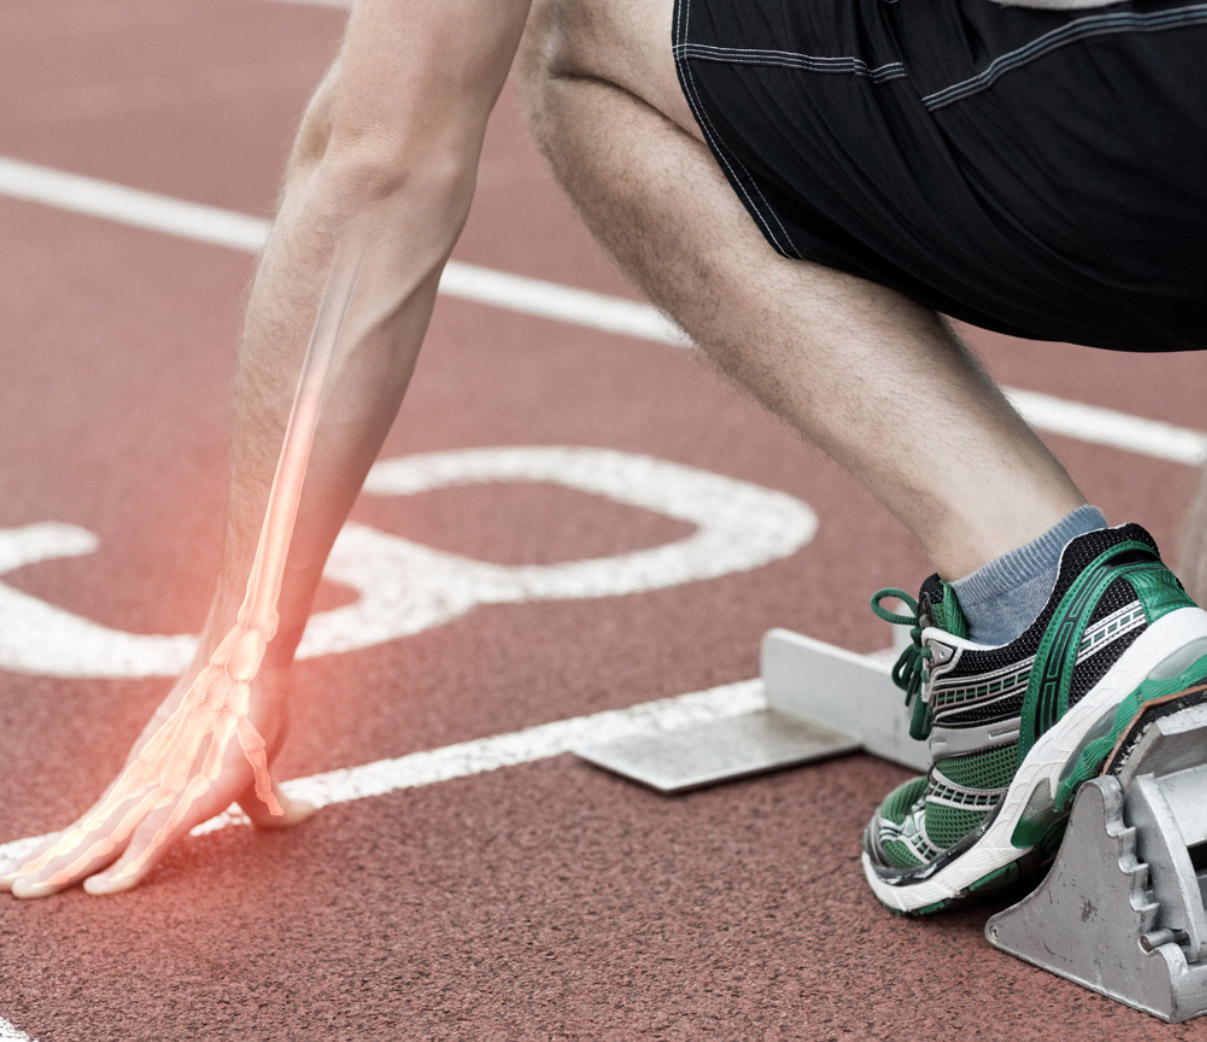 An image of a runner on a starting block on an outdoor track has the letters OTX overlaying the image with the words occupational therapy below to represent the relevant occupational therapy treatment services offered.